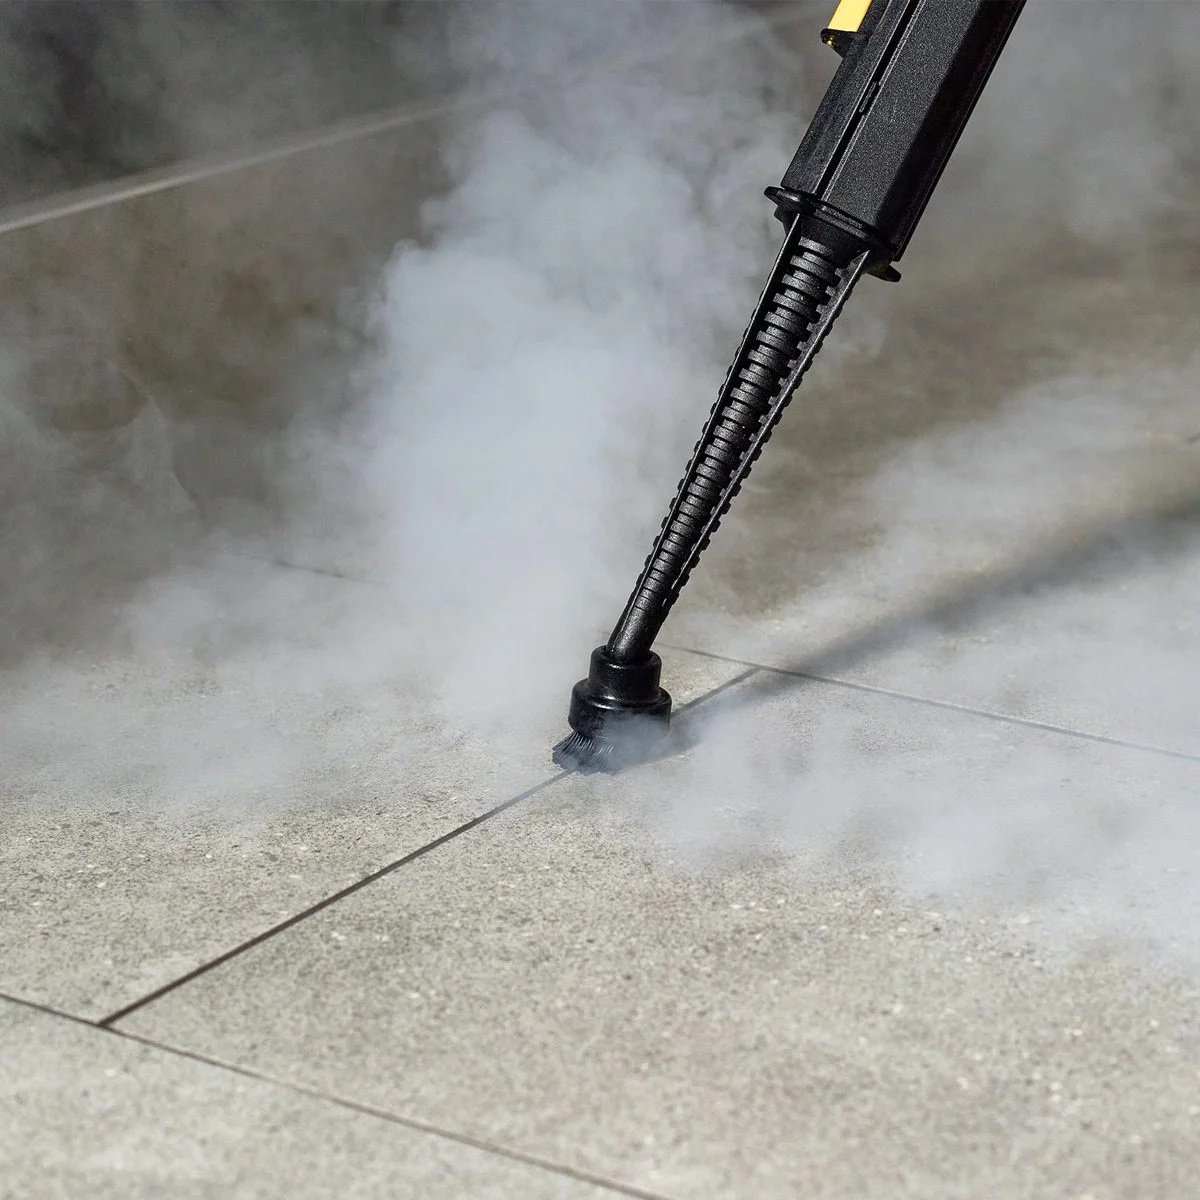 steam cleaning grout tiles